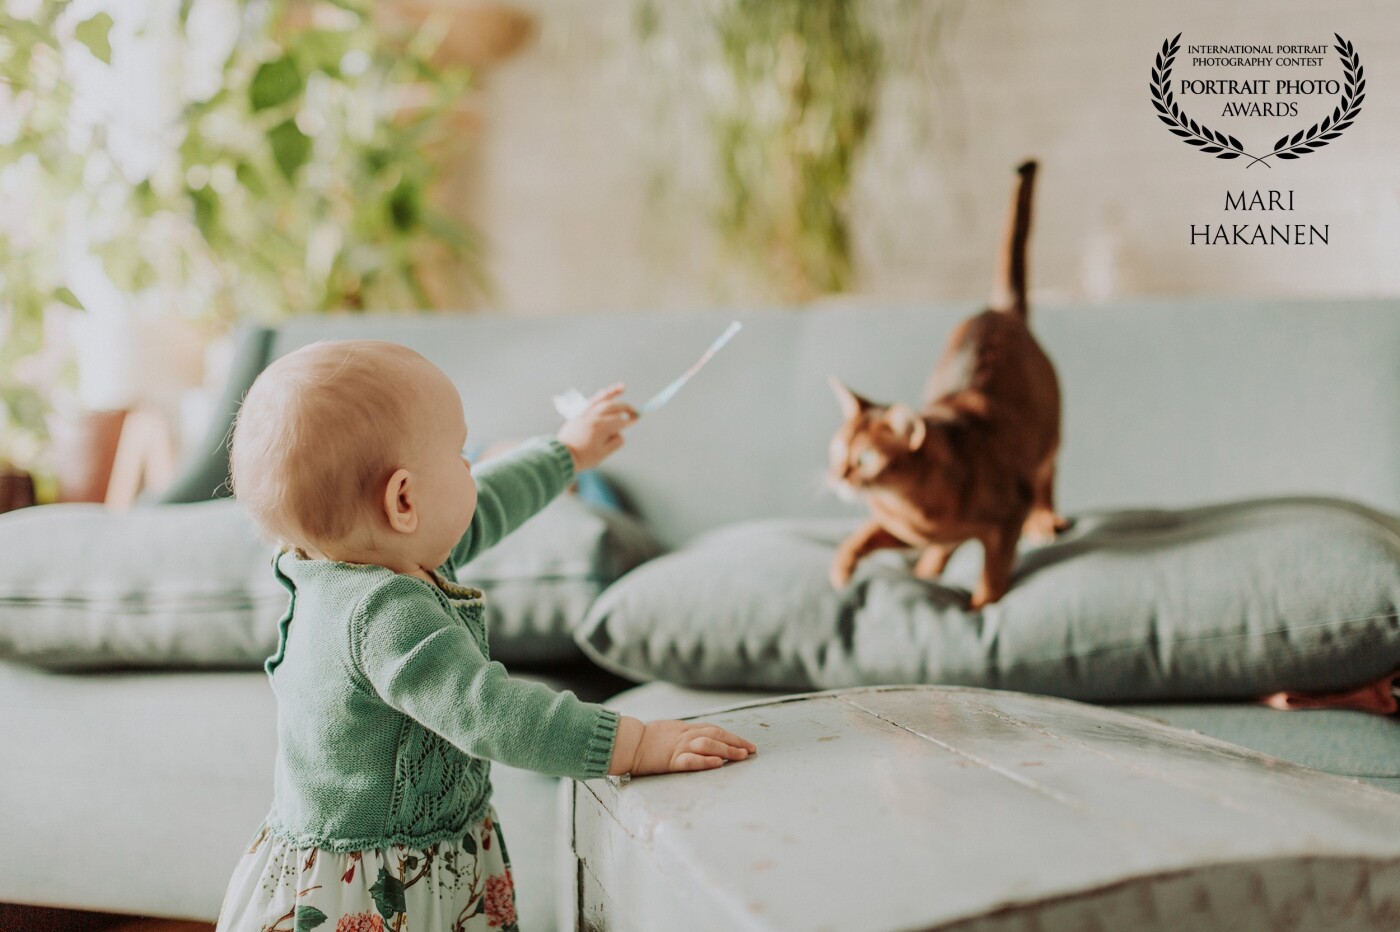 This picture was taken in the middle of a photo shoot of a one-year-old girl. It was not staged or planned in any way, the cat just appeared and started playing with the child and her amusement park wristband. Natural light is the only light used in taking the picture.